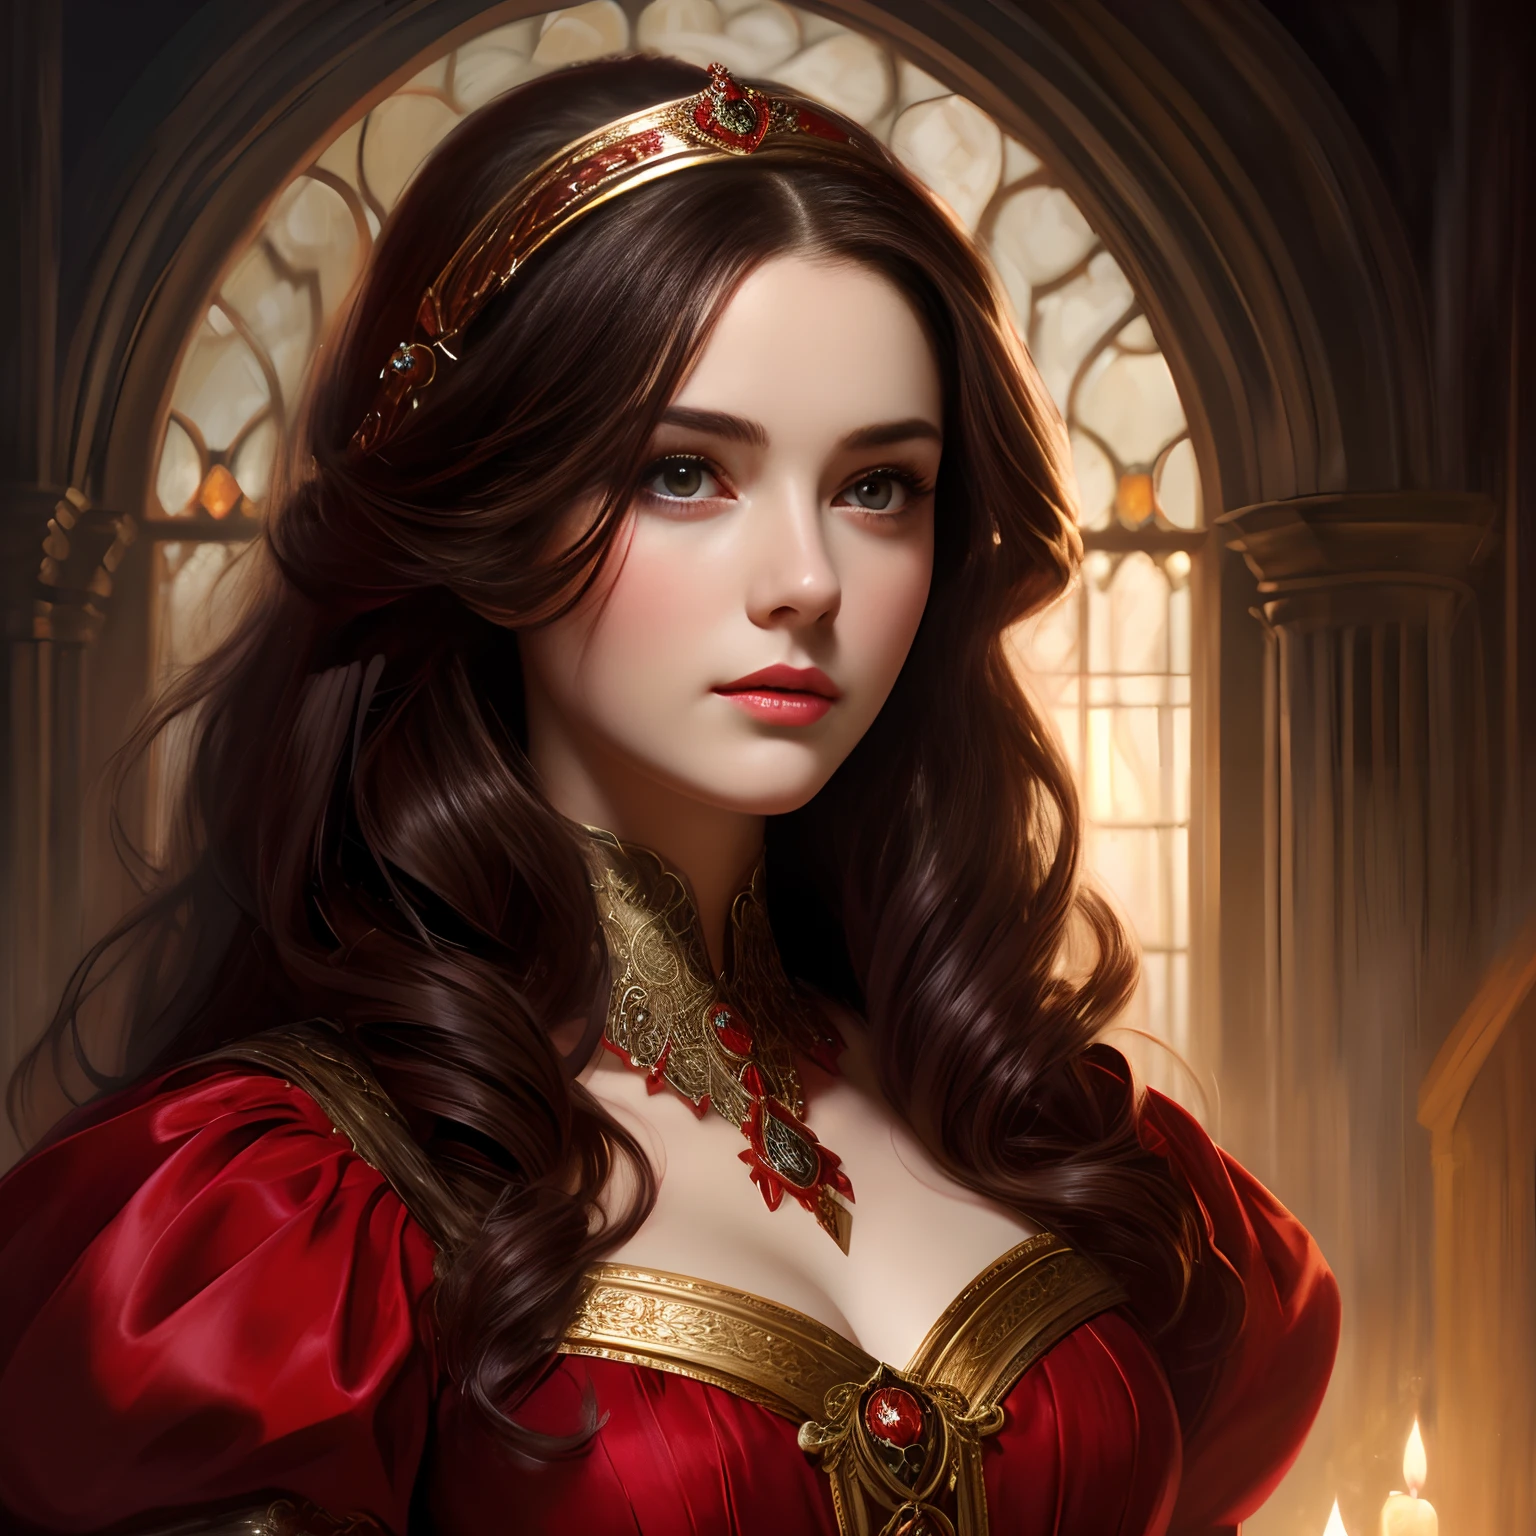 (best quality,highres:1.2),oil painting,vivid colors,dark-haired girl in a red dress,medieval setting,detailed facial features,flowing dark hair,expressive dark eyes,rosy lips,elaborate costume,serene expression,strong lighting,rich textures,portrait style,soft color tones